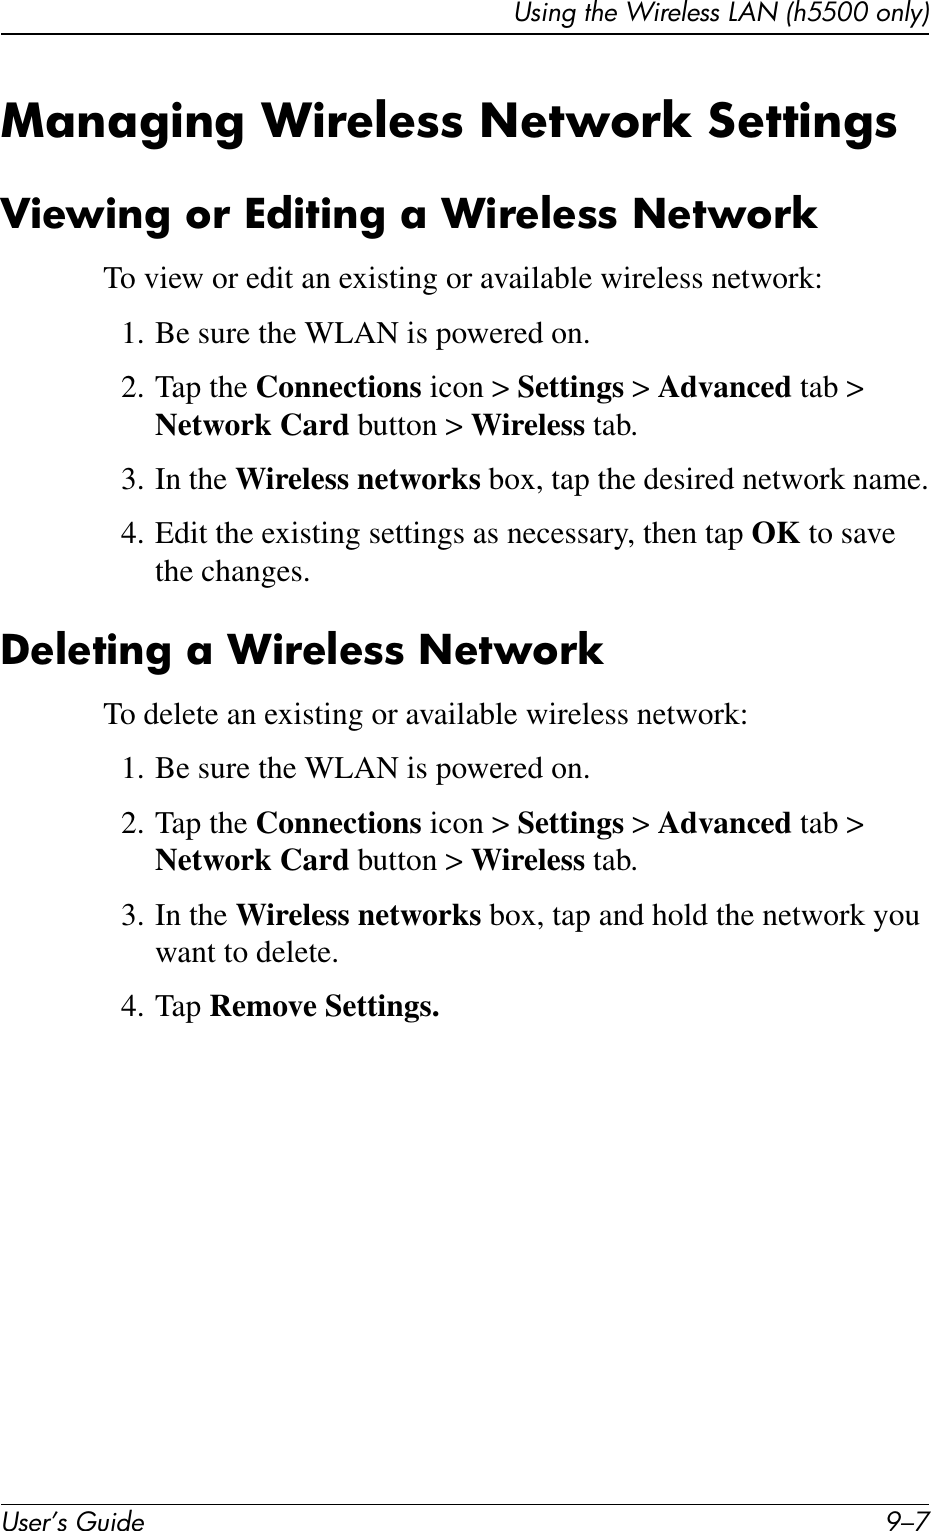 Using the Wireless LAN (h5500 only)User’s Guide 9–7Managing Wireless Network SettingsViewing or Editing a Wireless NetworkTo view or edit an existing or available wireless network:1. Be sure the WLAN is powered on.2. Tap the Connections icon &gt; Settings &gt; Advanced tab &gt; Network Card button &gt; Wireless tab.3. In the Wireless networks box, tap the desired network name.4. Edit the existing settings as necessary, then tap OK to save the changes.Deleting a Wireless NetworkTo delete an existing or available wireless network:1. Be sure the WLAN is powered on.2. Tap the Connections icon &gt; Settings &gt; Advanced tab &gt; Network Card button &gt; Wireless tab.3. In the Wireless networks box, tap and hold the network you want to delete.4. Tap Remove Settings.